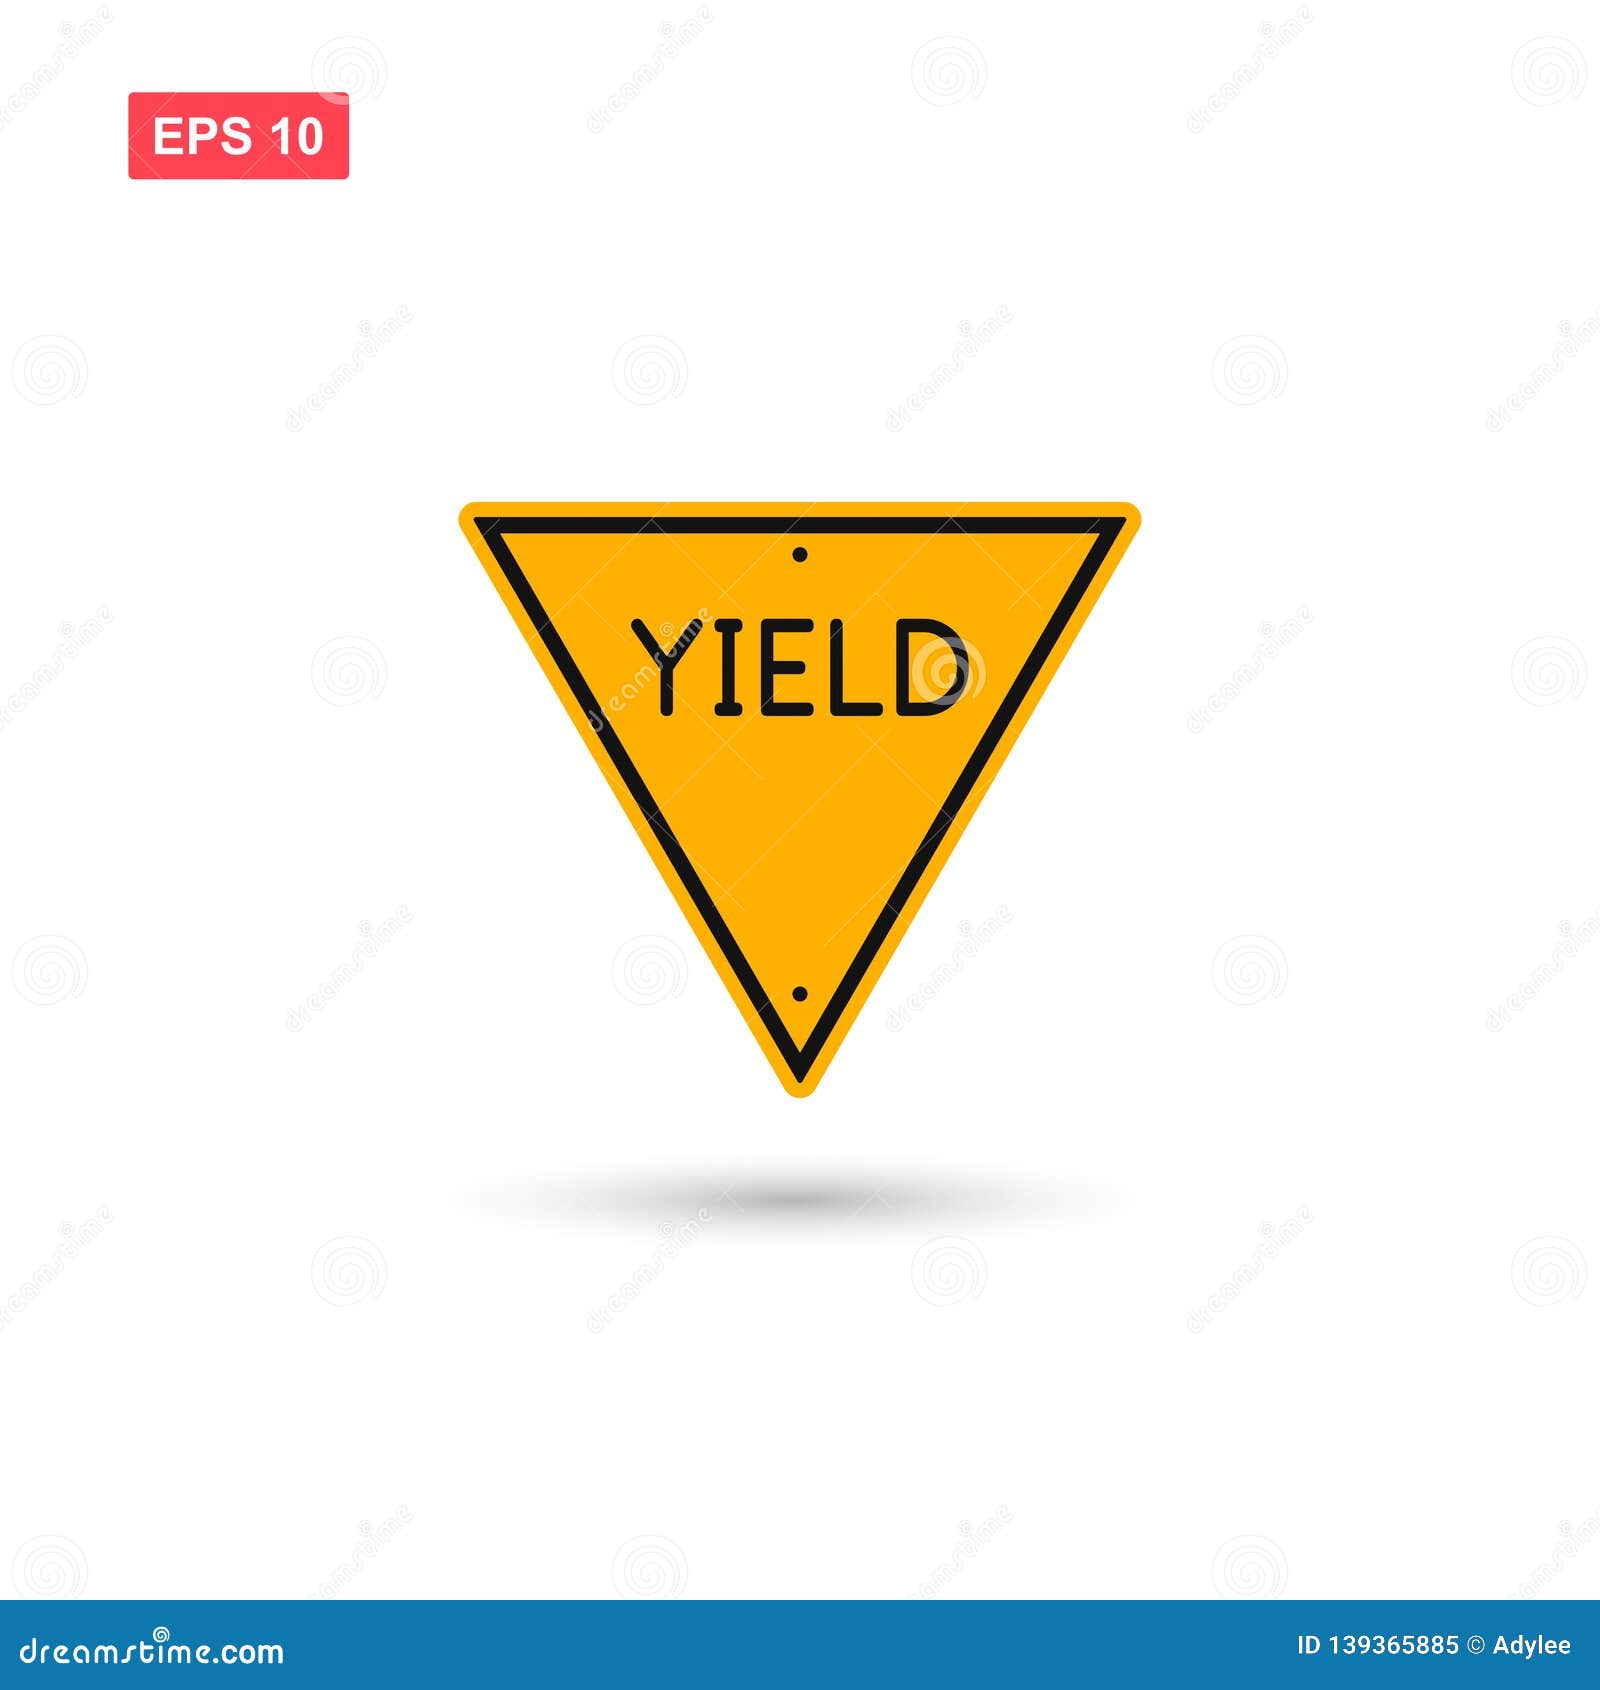 yield triangle sign icon  